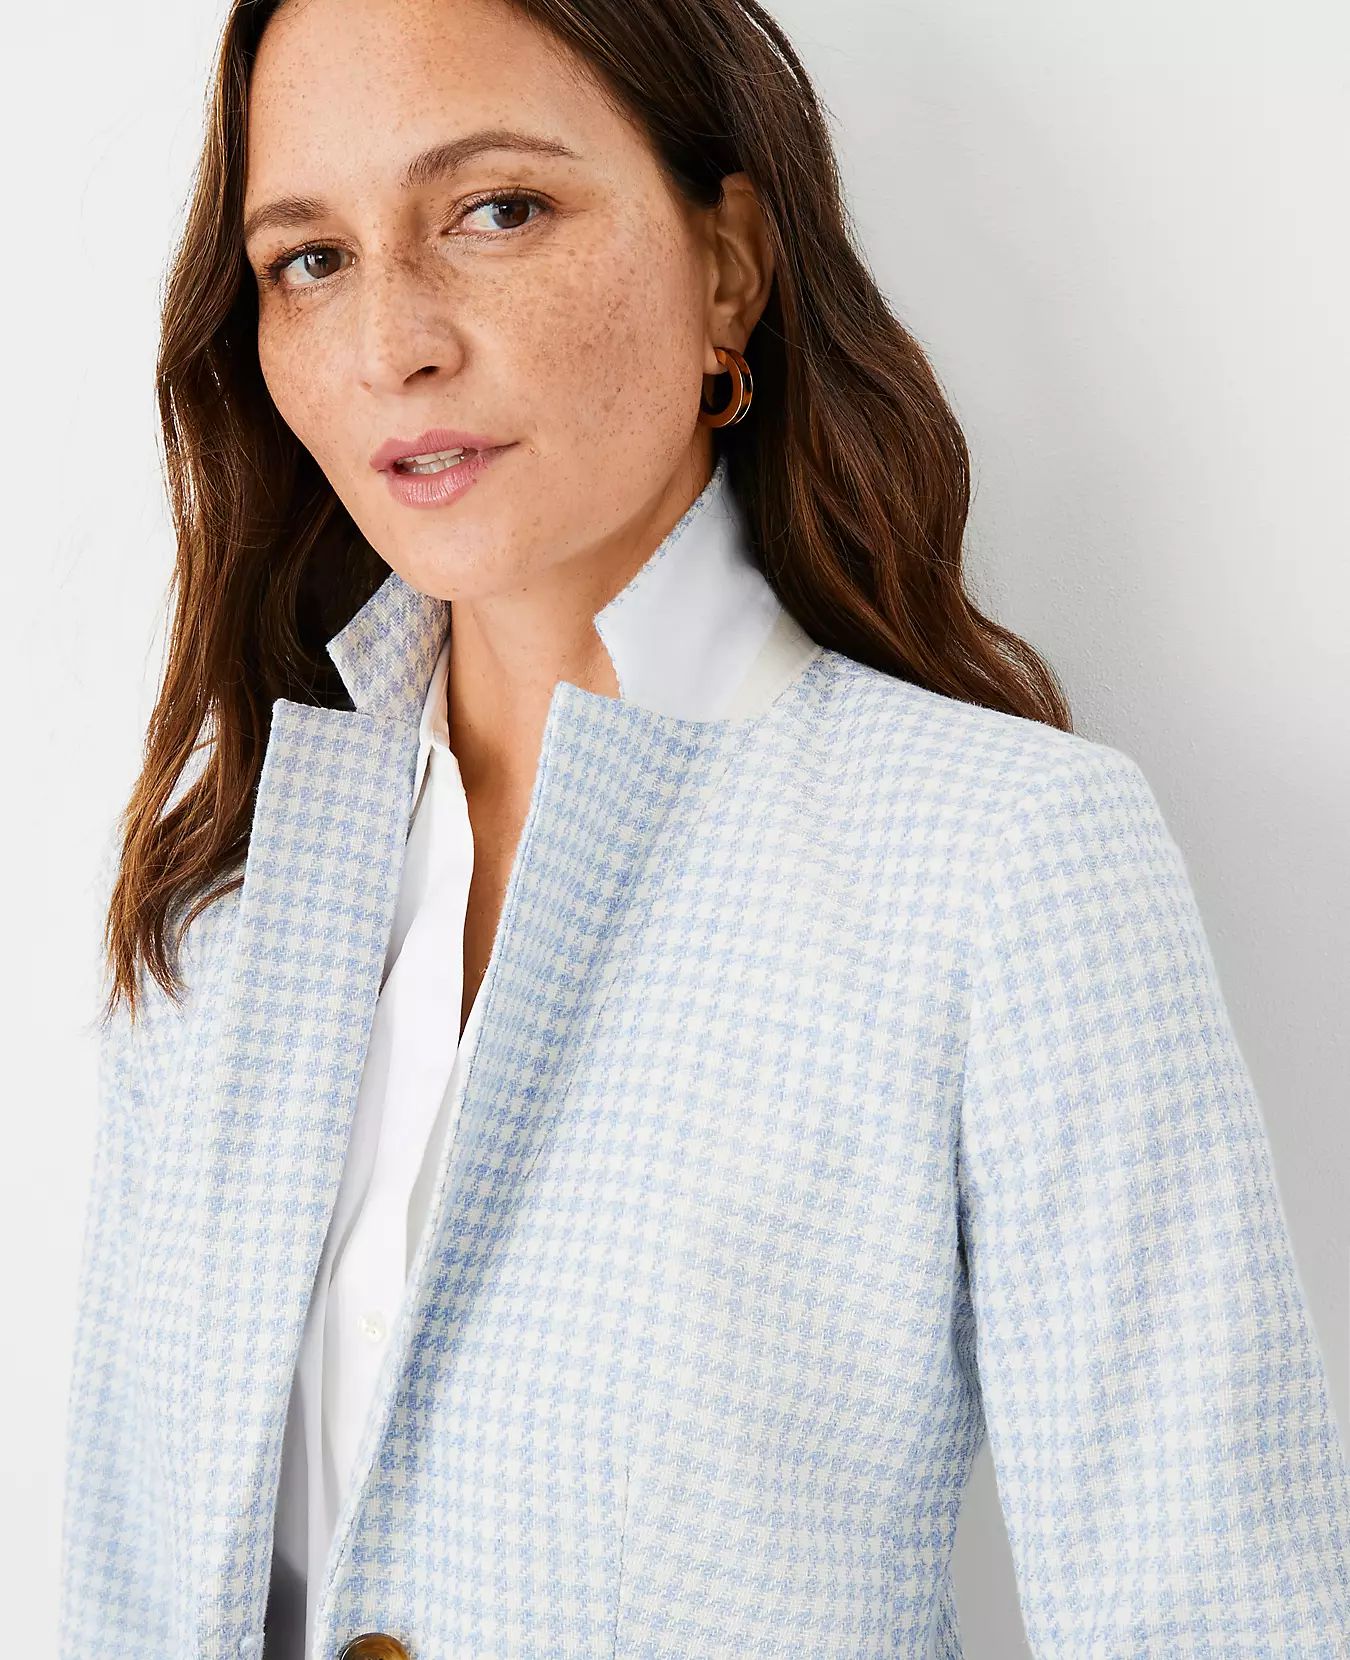 The Petite Greenwich Blazer in Houndstooth | Ann Taylor | Ann Taylor (US)